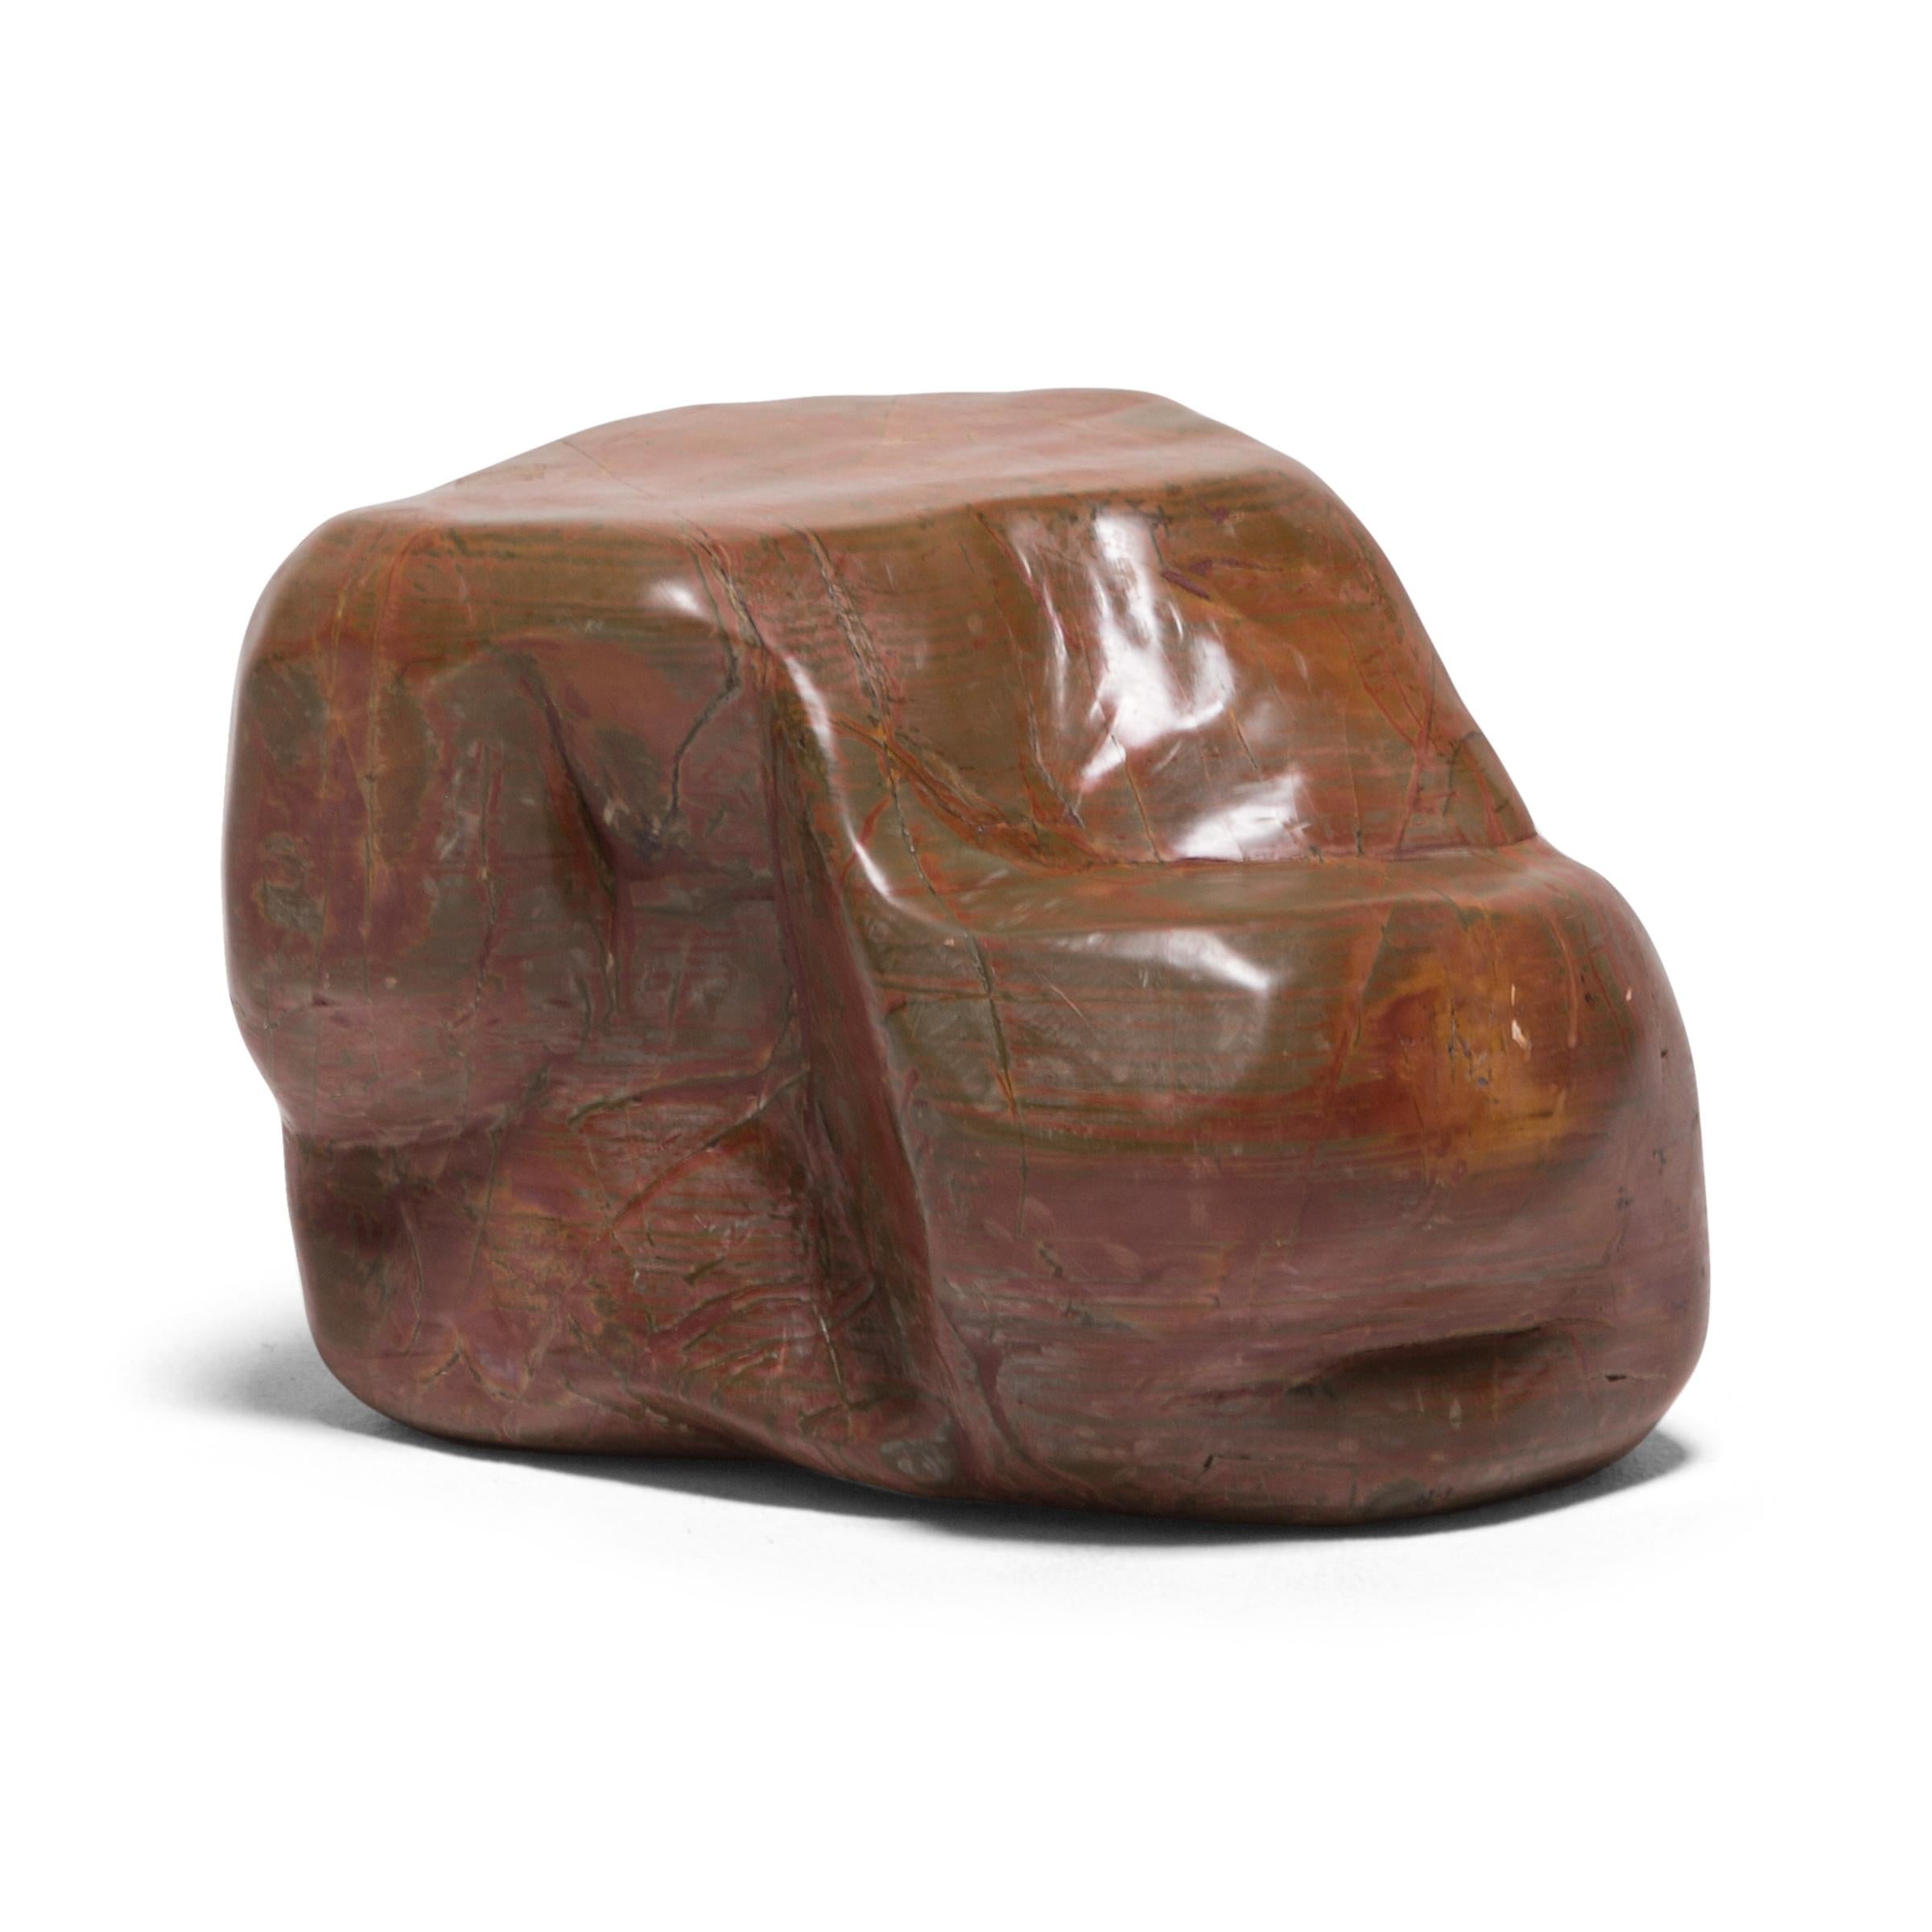 A well-chosen stone is a focal point of both a traditional Chinese garden and a scholar's studio - evoking the complexities of nature and inspiring creative thought. Sourced from China's Guangxi province, this meditation stone has a subtle pattern